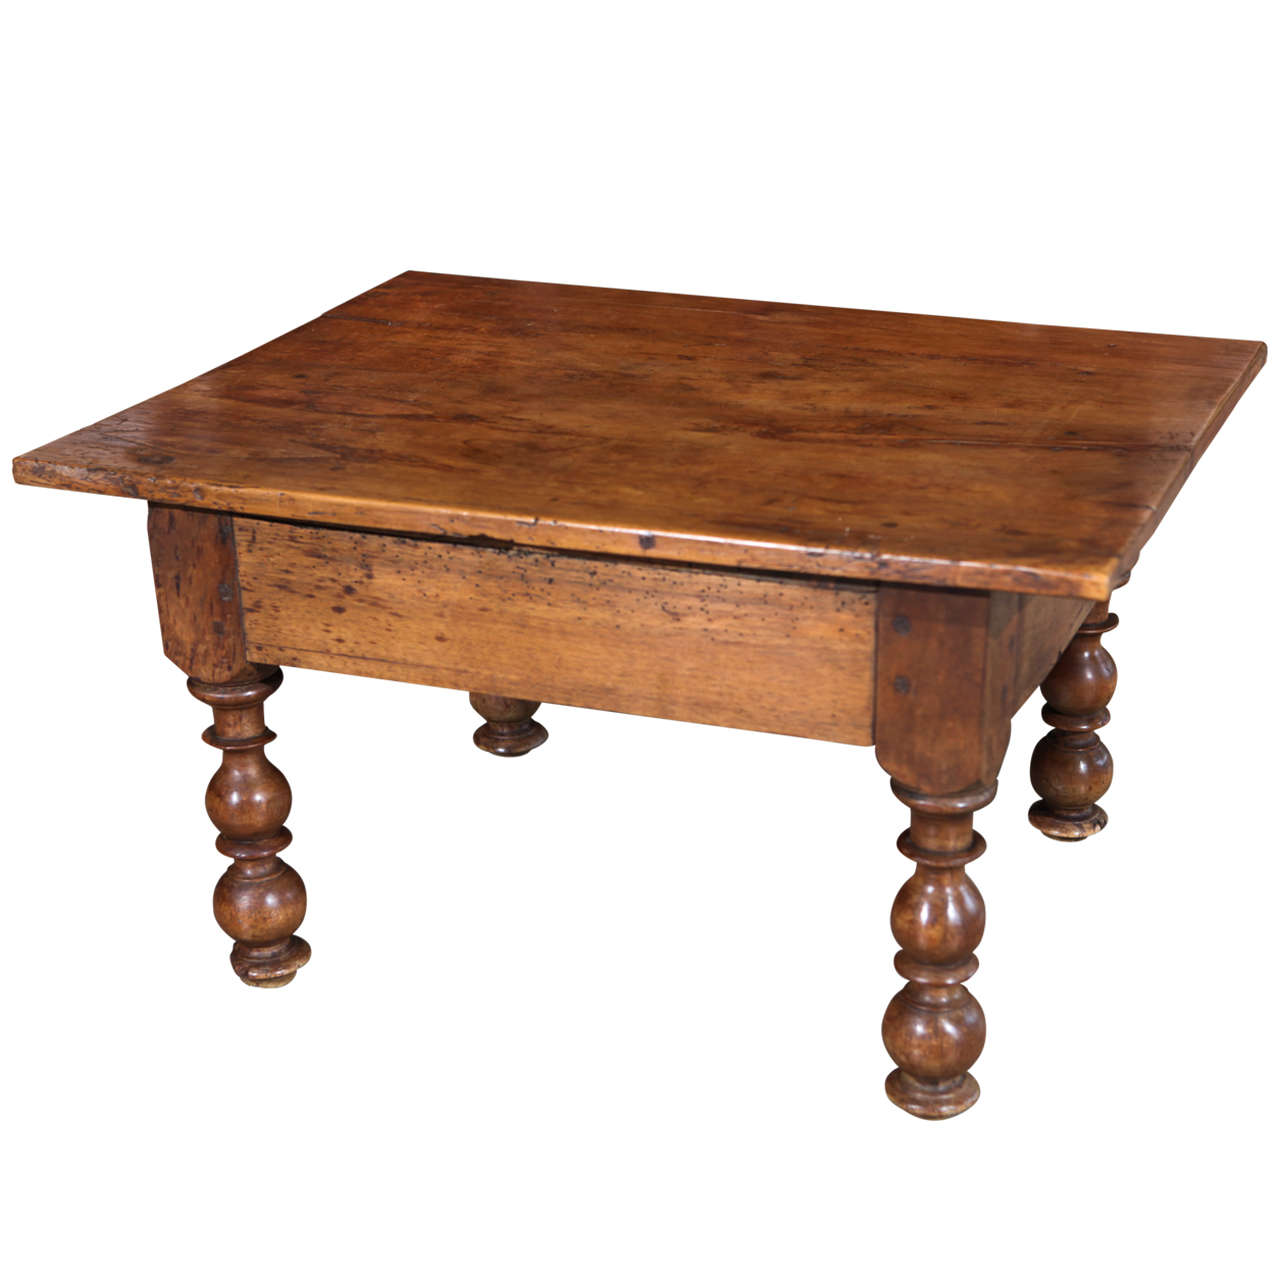 A Low Mexican Colonial Table, c. 1800